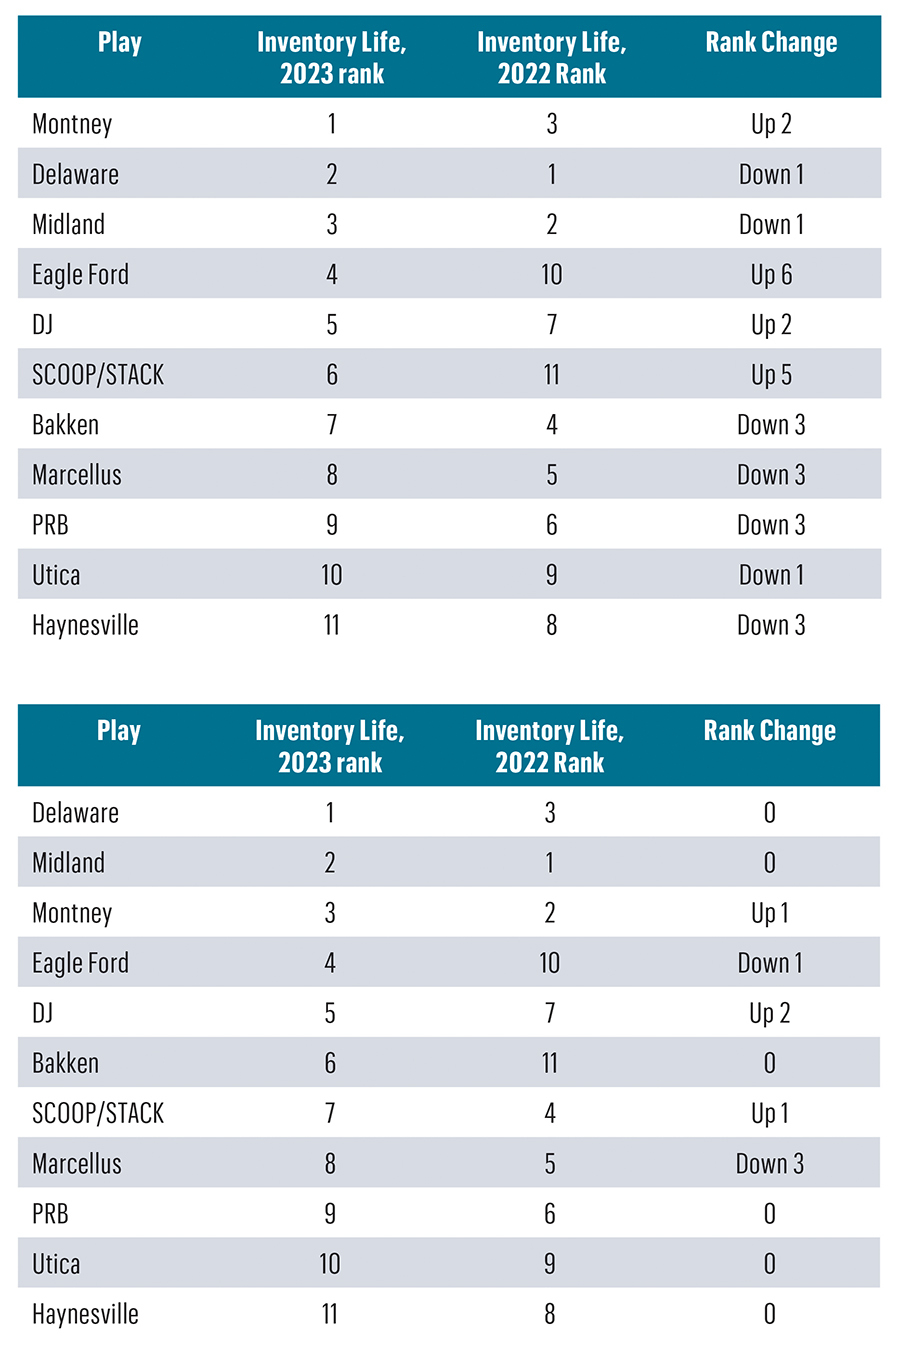 Enverus Inventory Rankings: Pinpointing Shale’s Best Remaining Runway